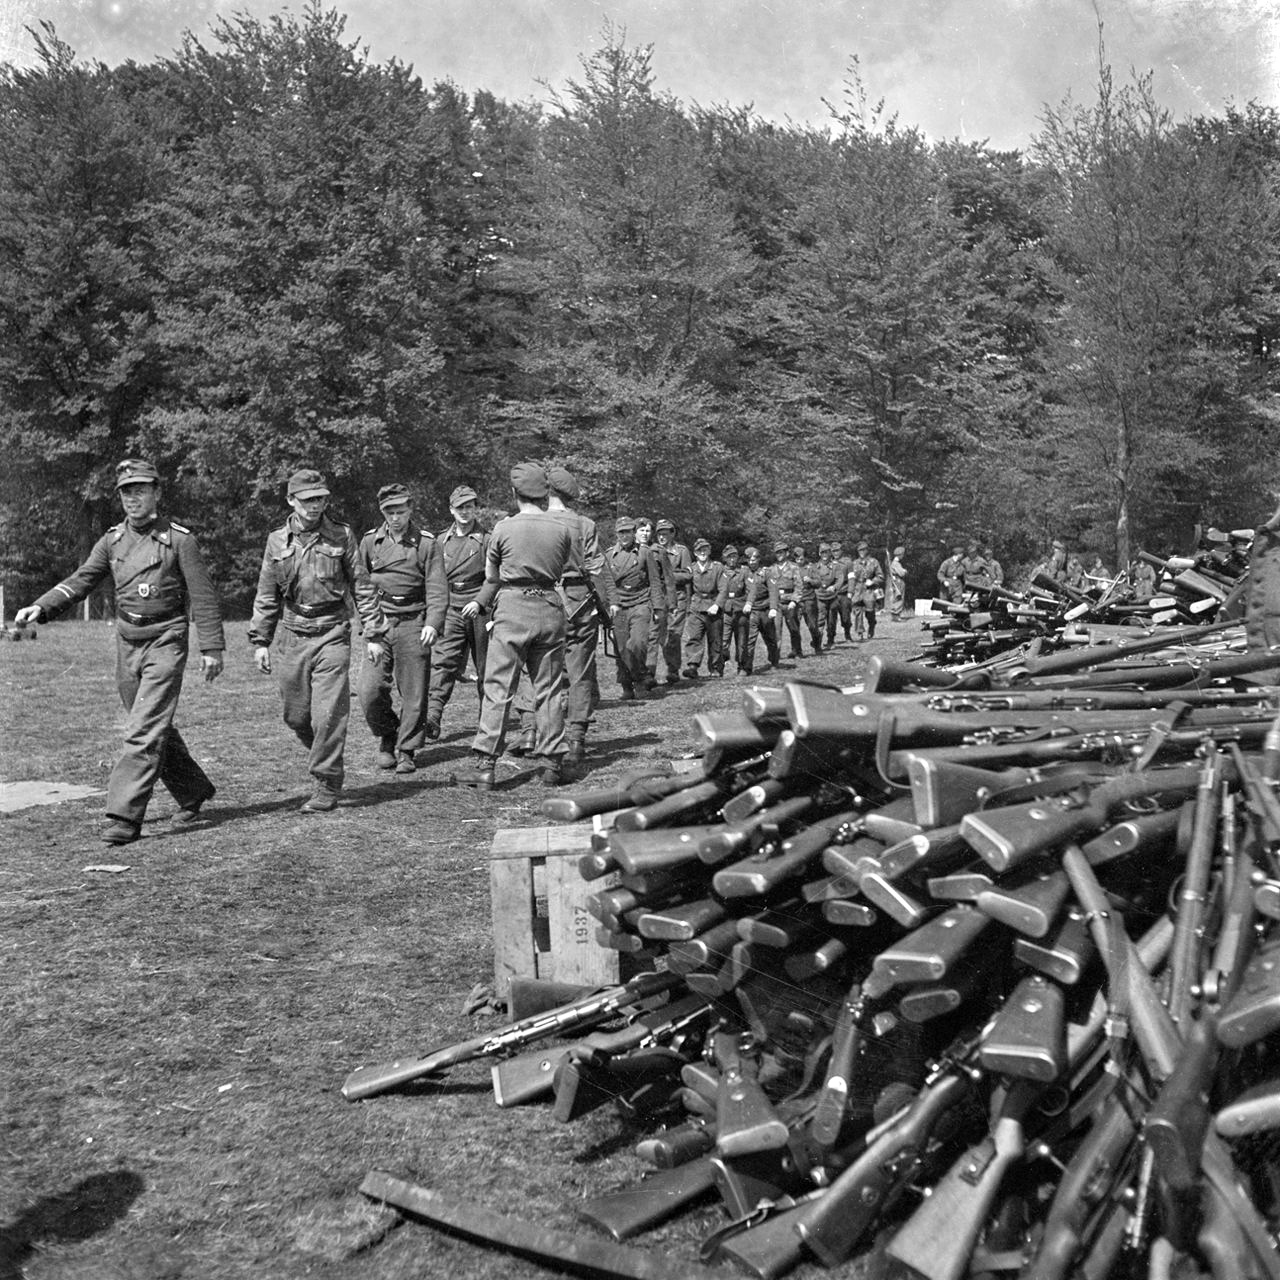 After surrendering their weapons, stacked in the right foreground in this photo, disarmed German soldiers march off to captivity.  This photo was taken on May 10, 1945, in the Netherlands.